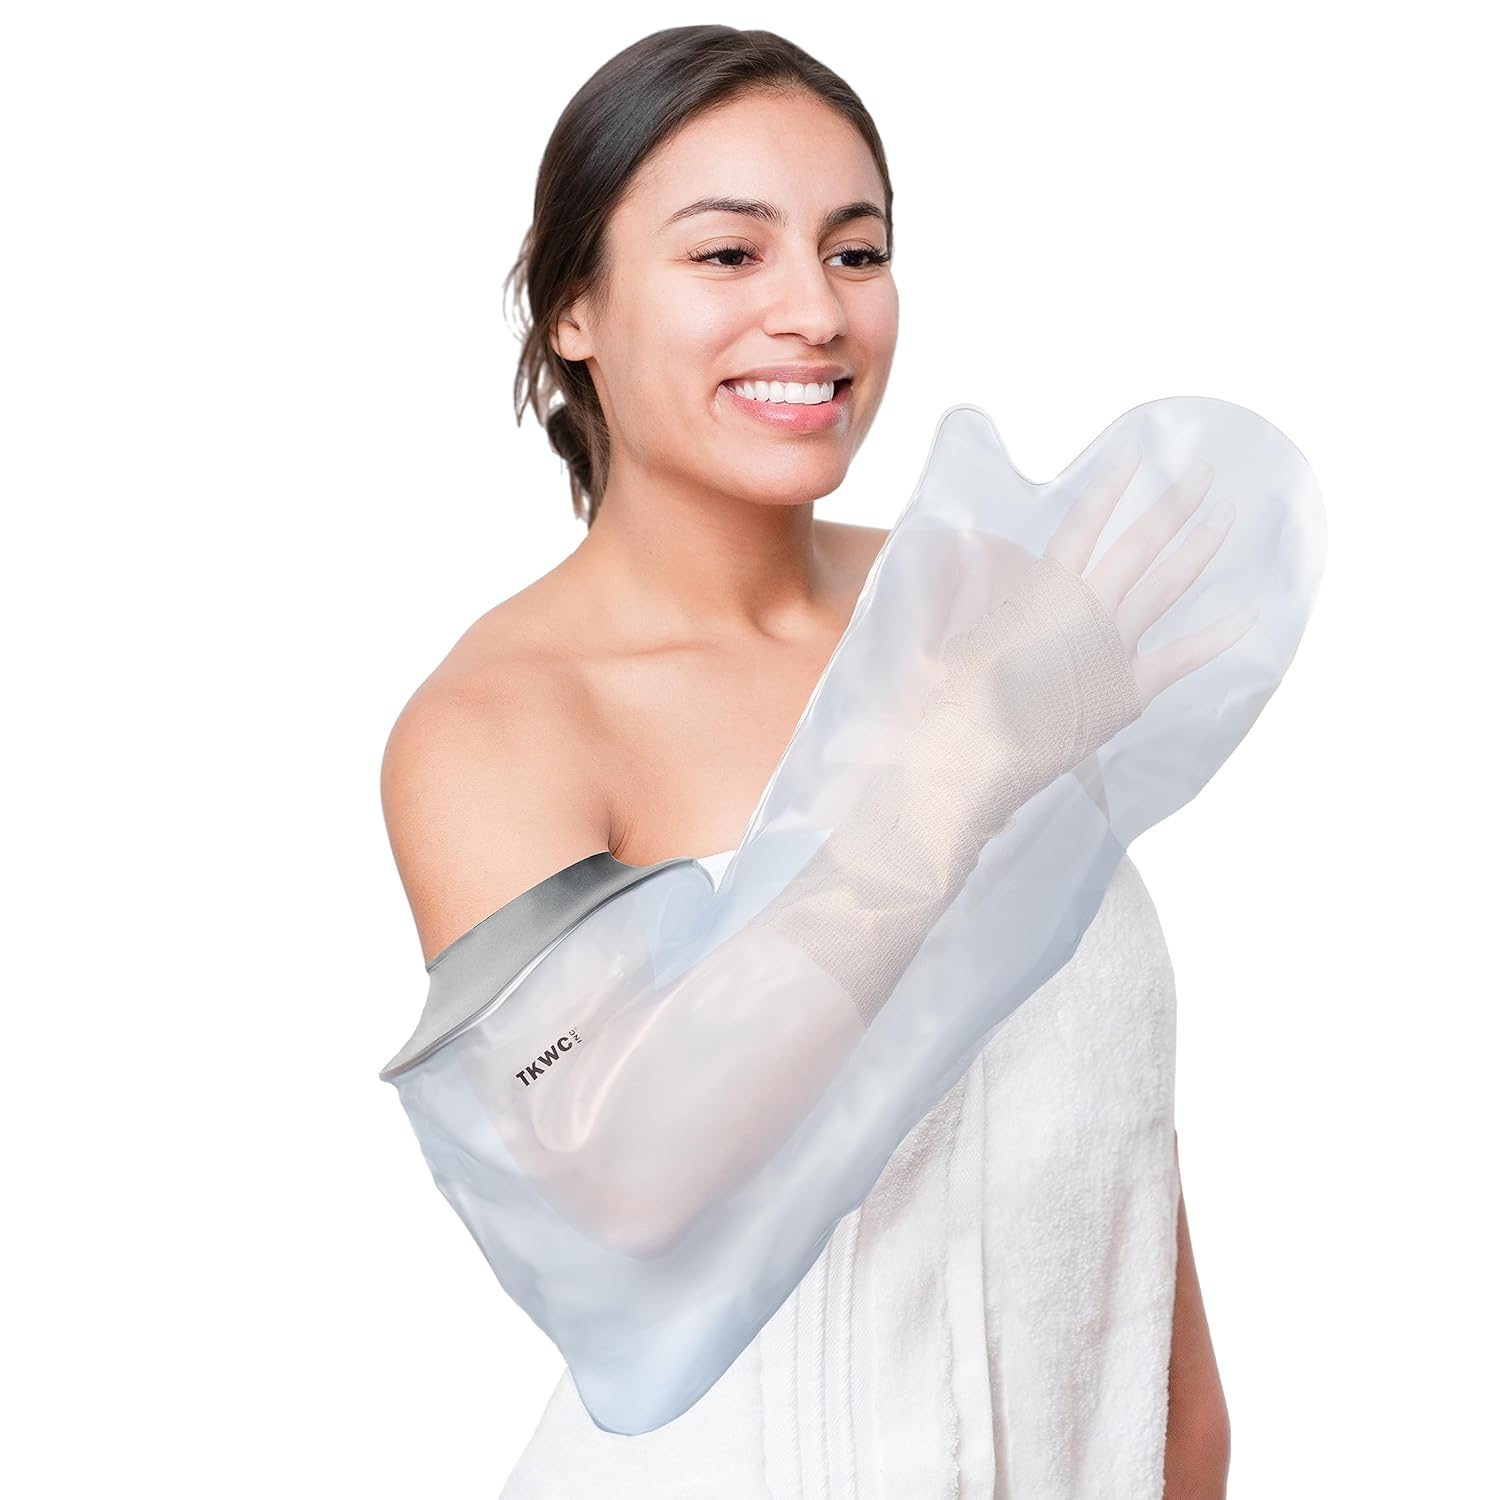 A smiling young woman fitting a transparent waterproof sleeve over her cast-covered left arm.